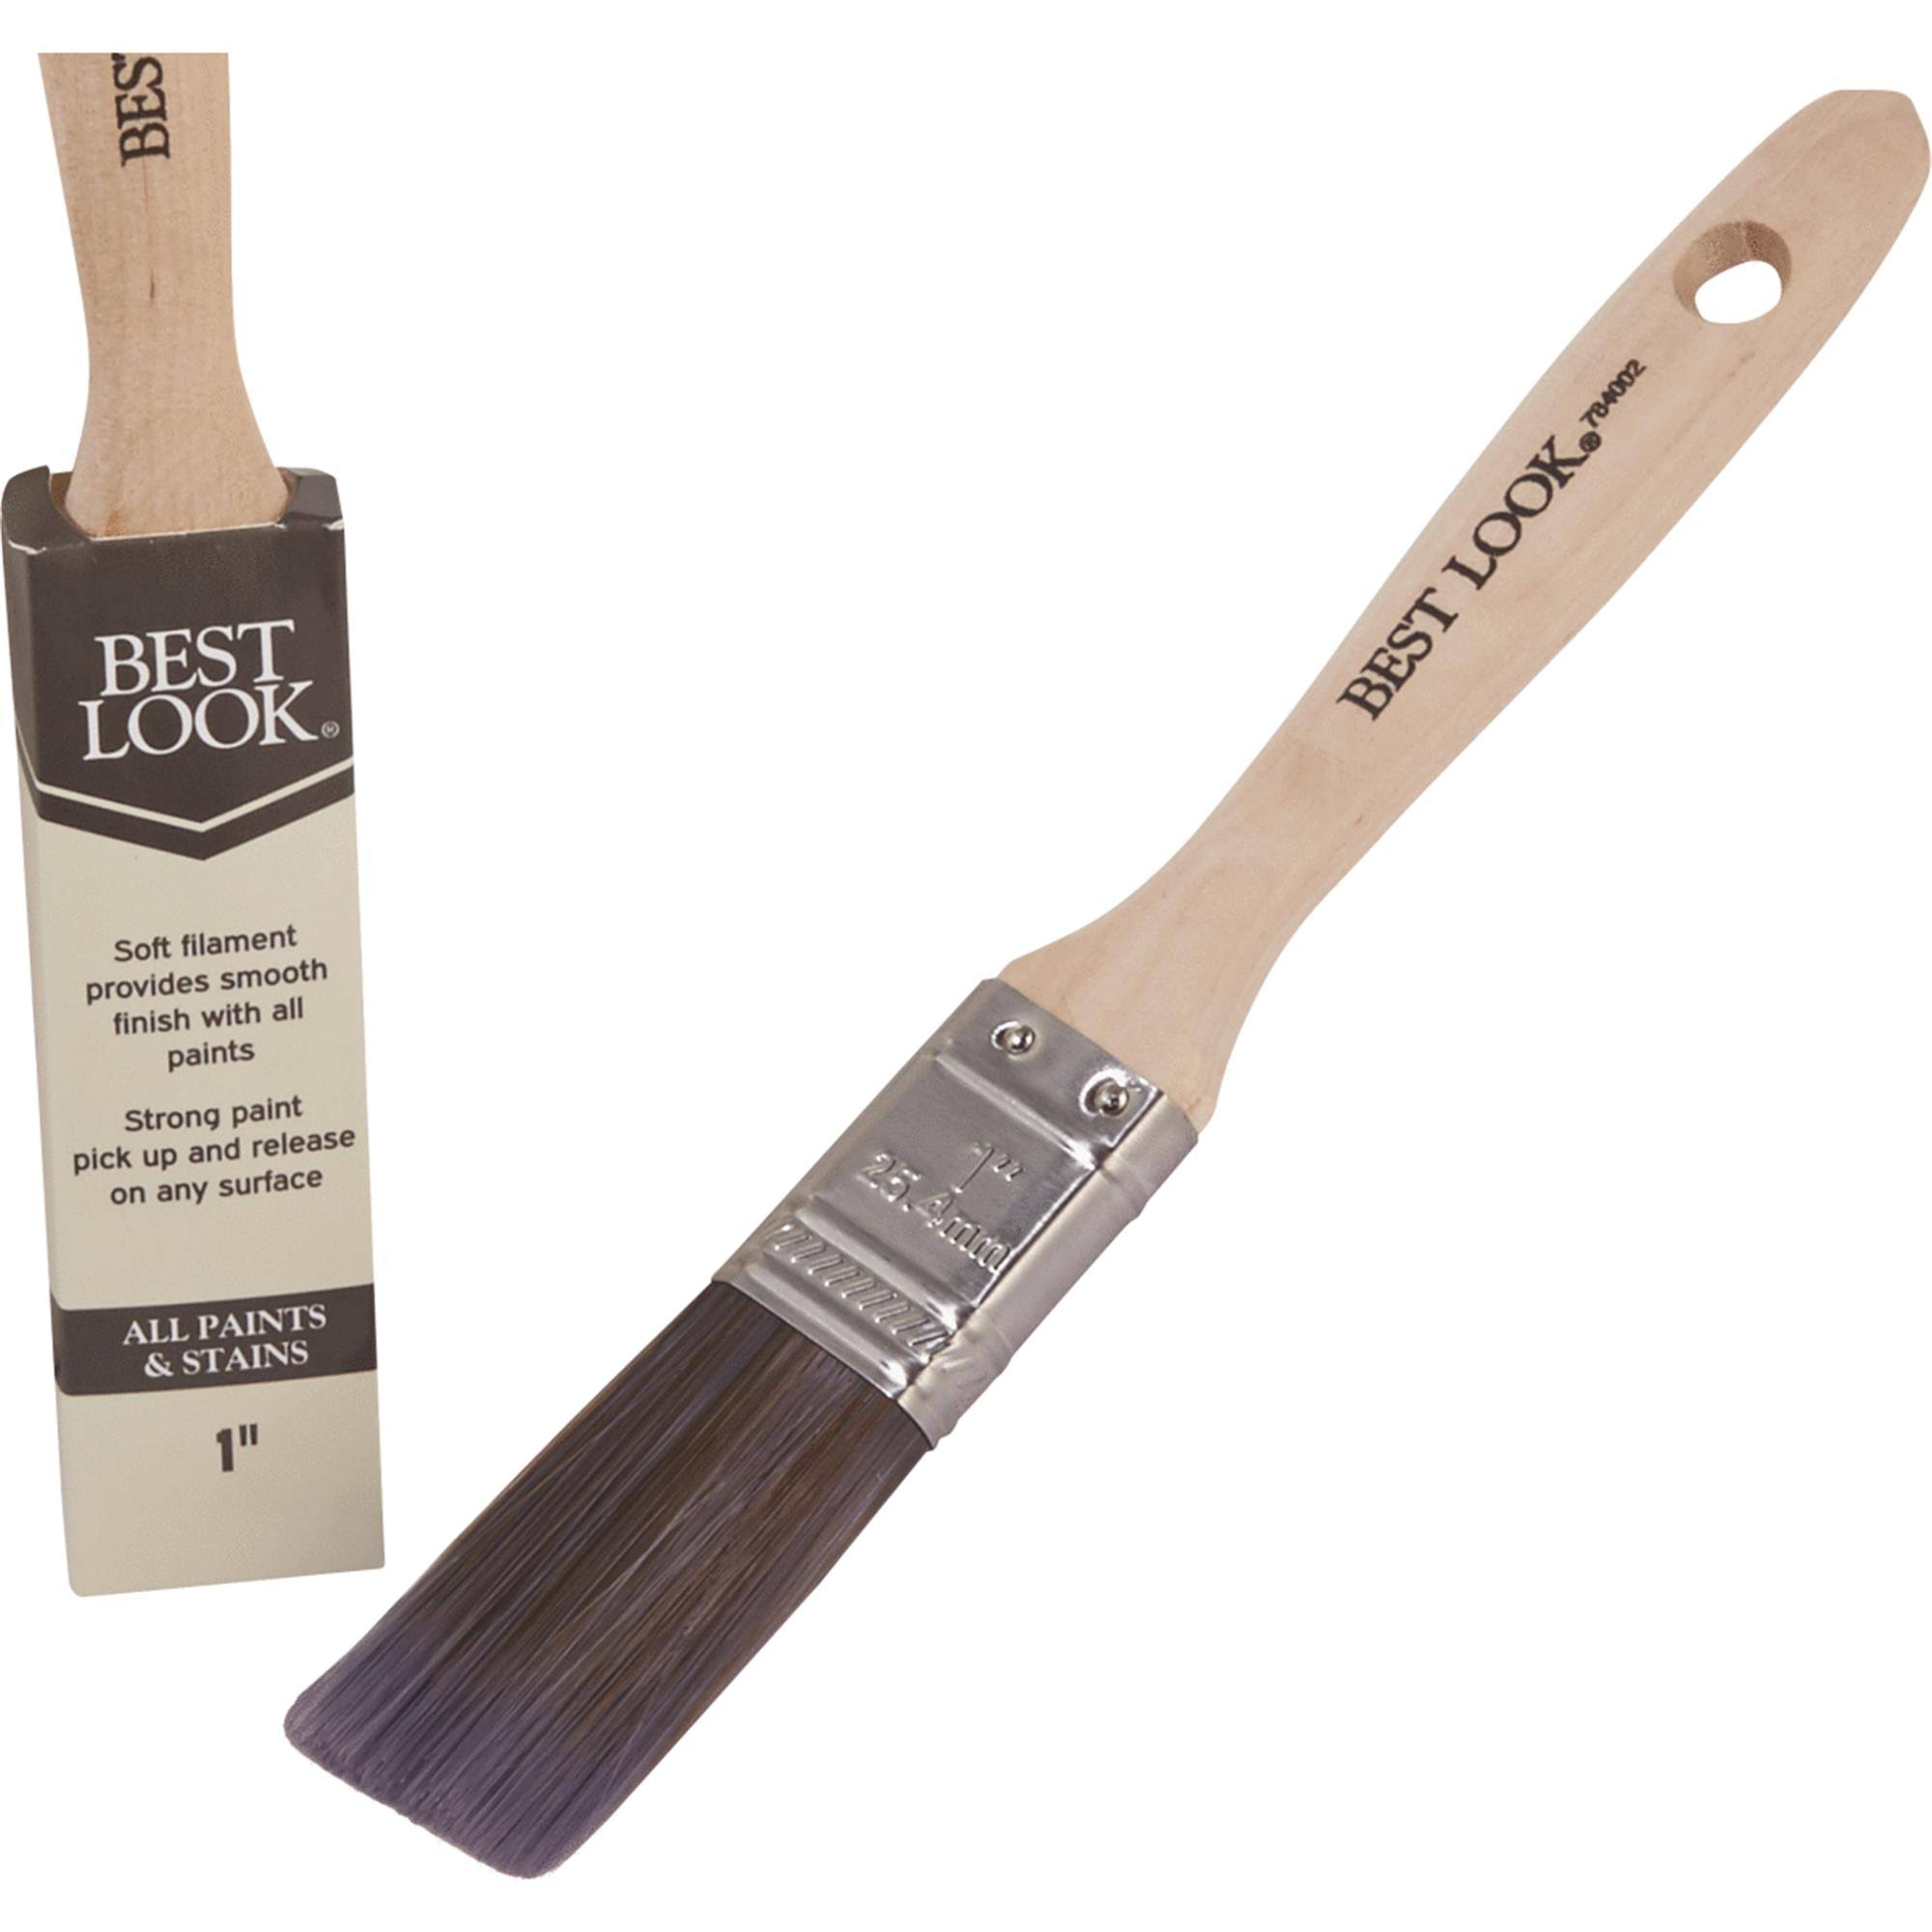 Best Look 1 In. Flat Polyester Paint Brush 784002